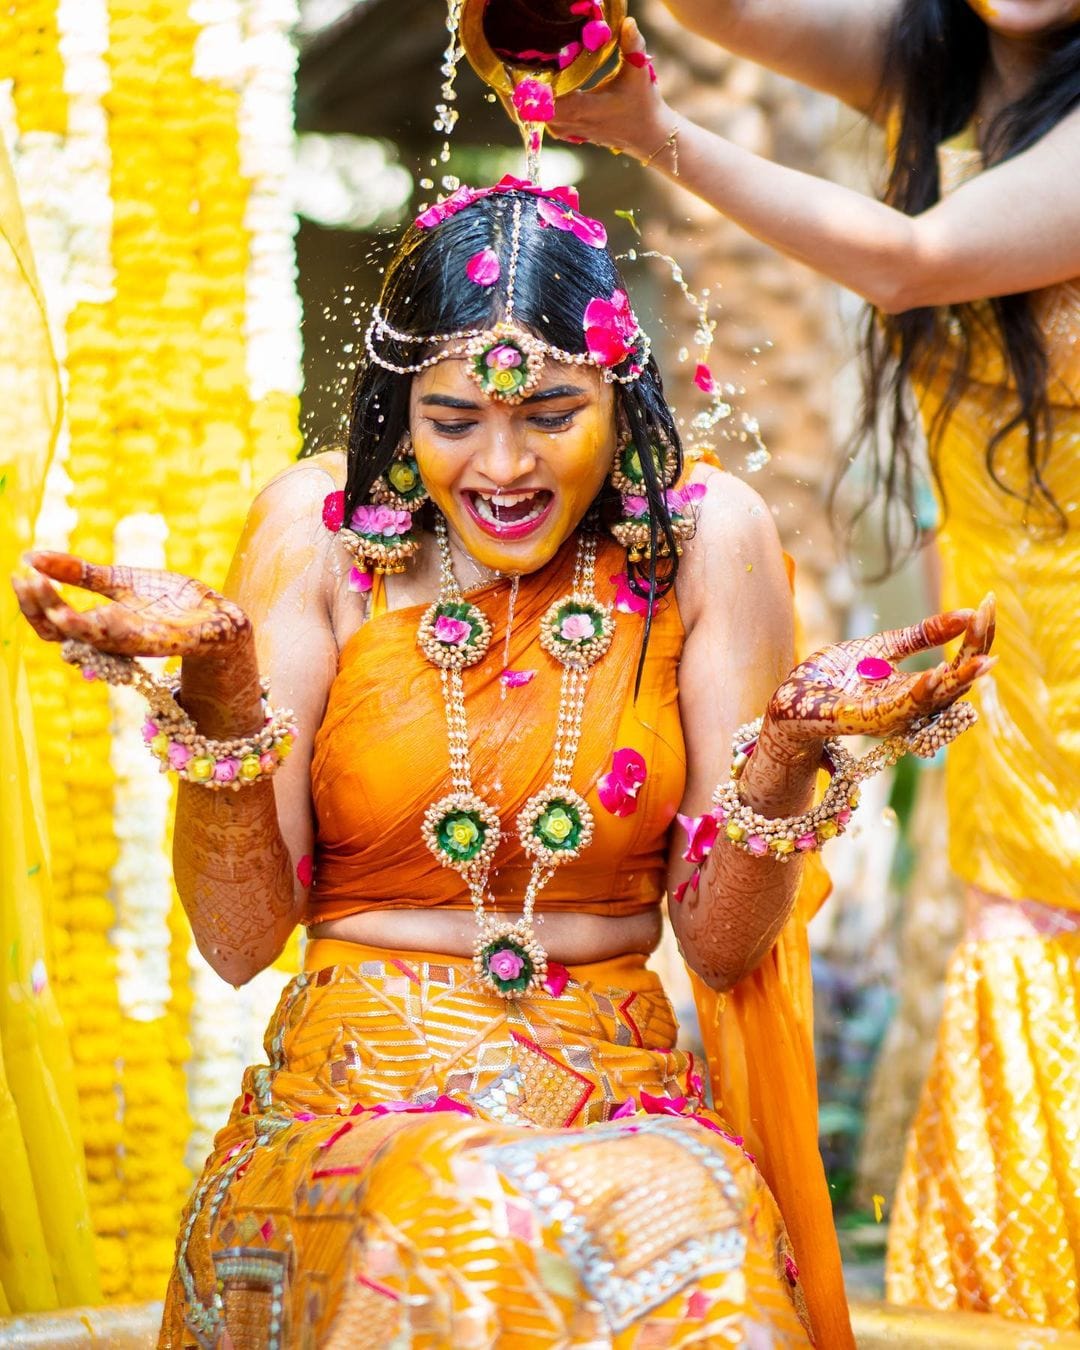 5 Poses Every Hindu Bride Should Try For Her Wedding Photography - PIP  Broadcast